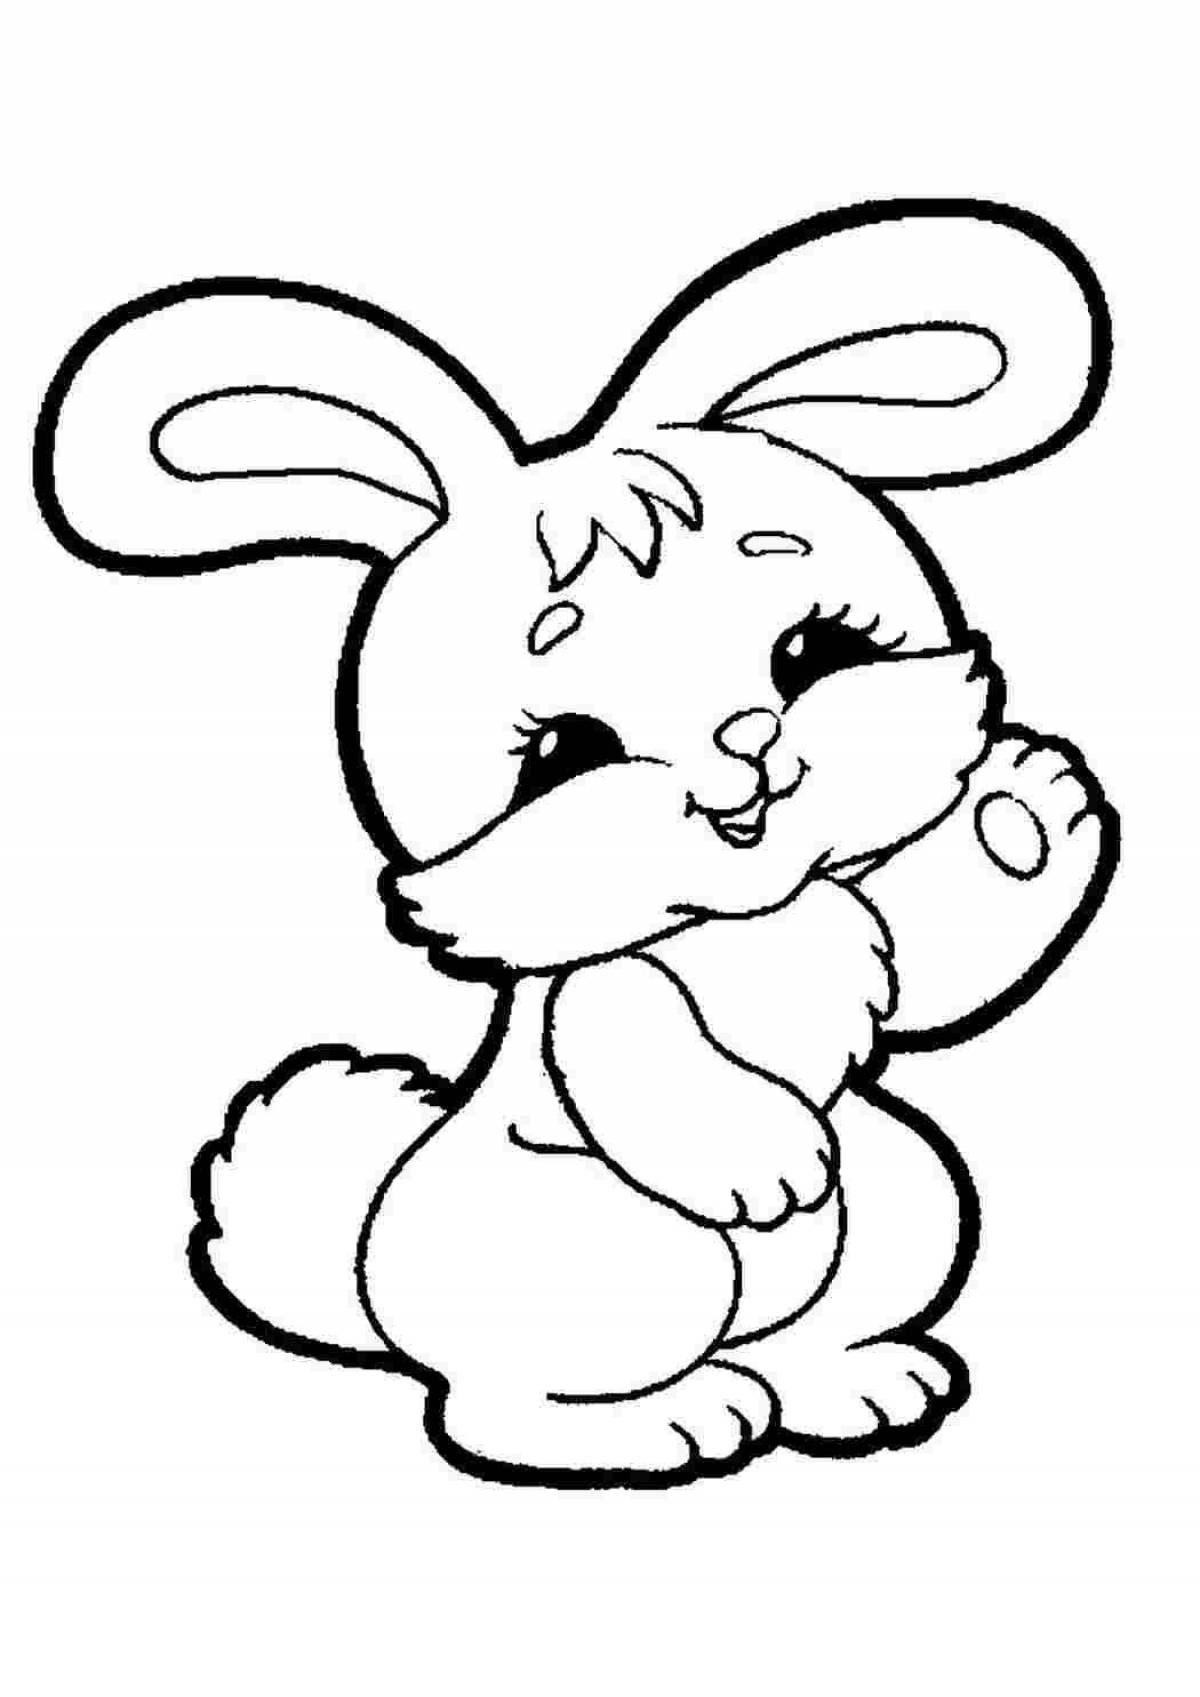 Snuggly coloring page bunny for 2-3 year olds